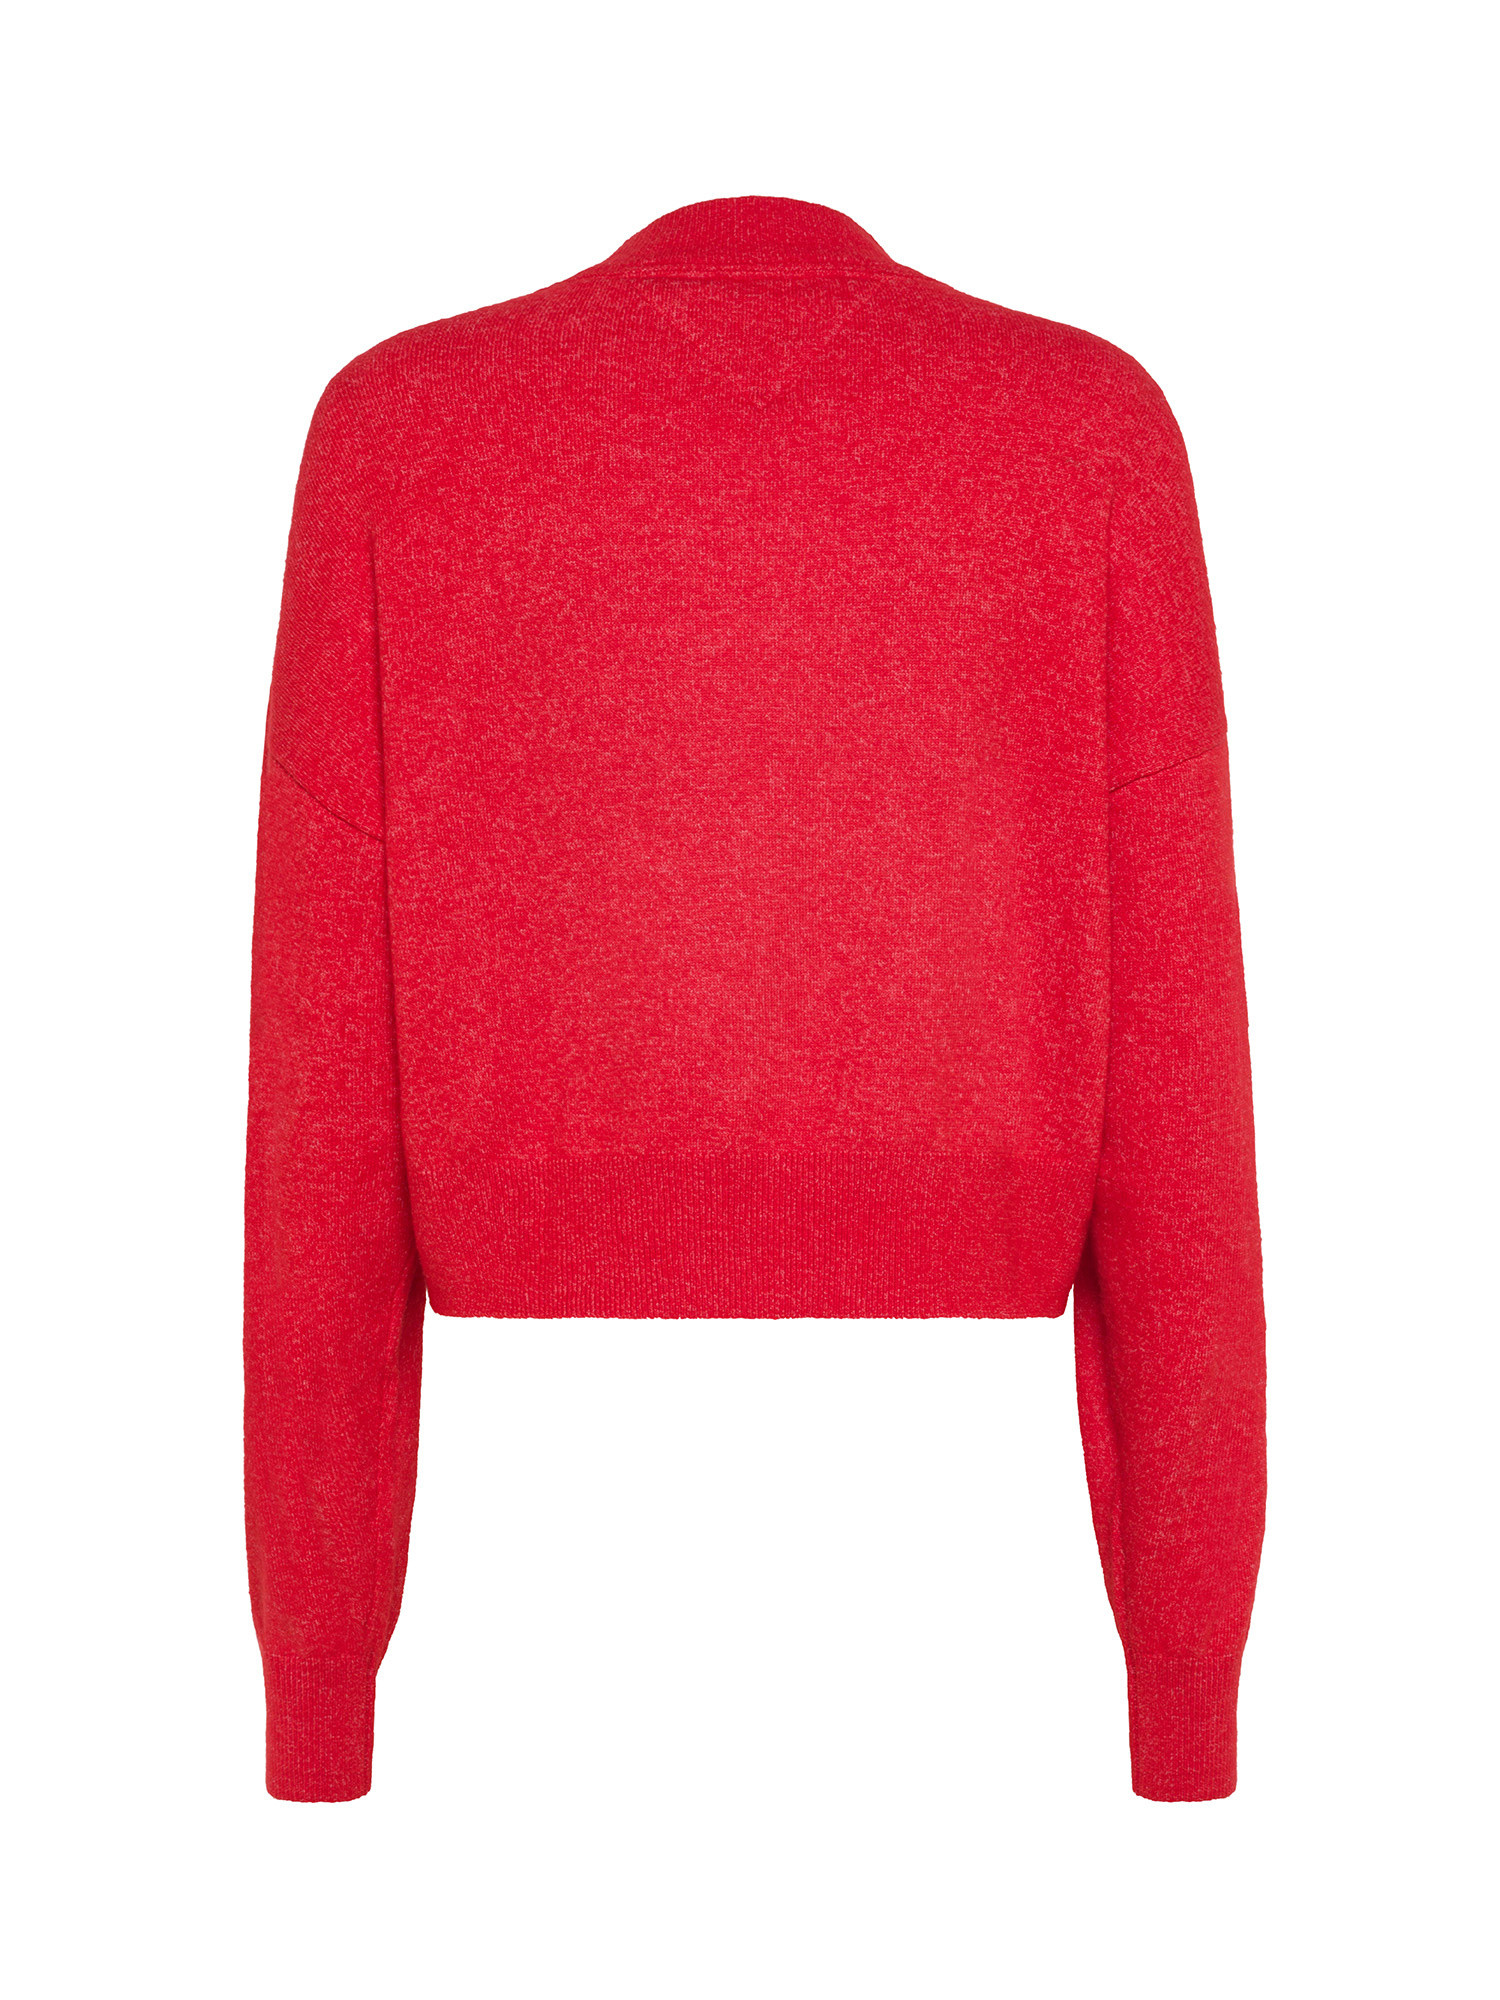 Tommy Jeans - Pullover collo alto con logo, Rosso, large image number 1